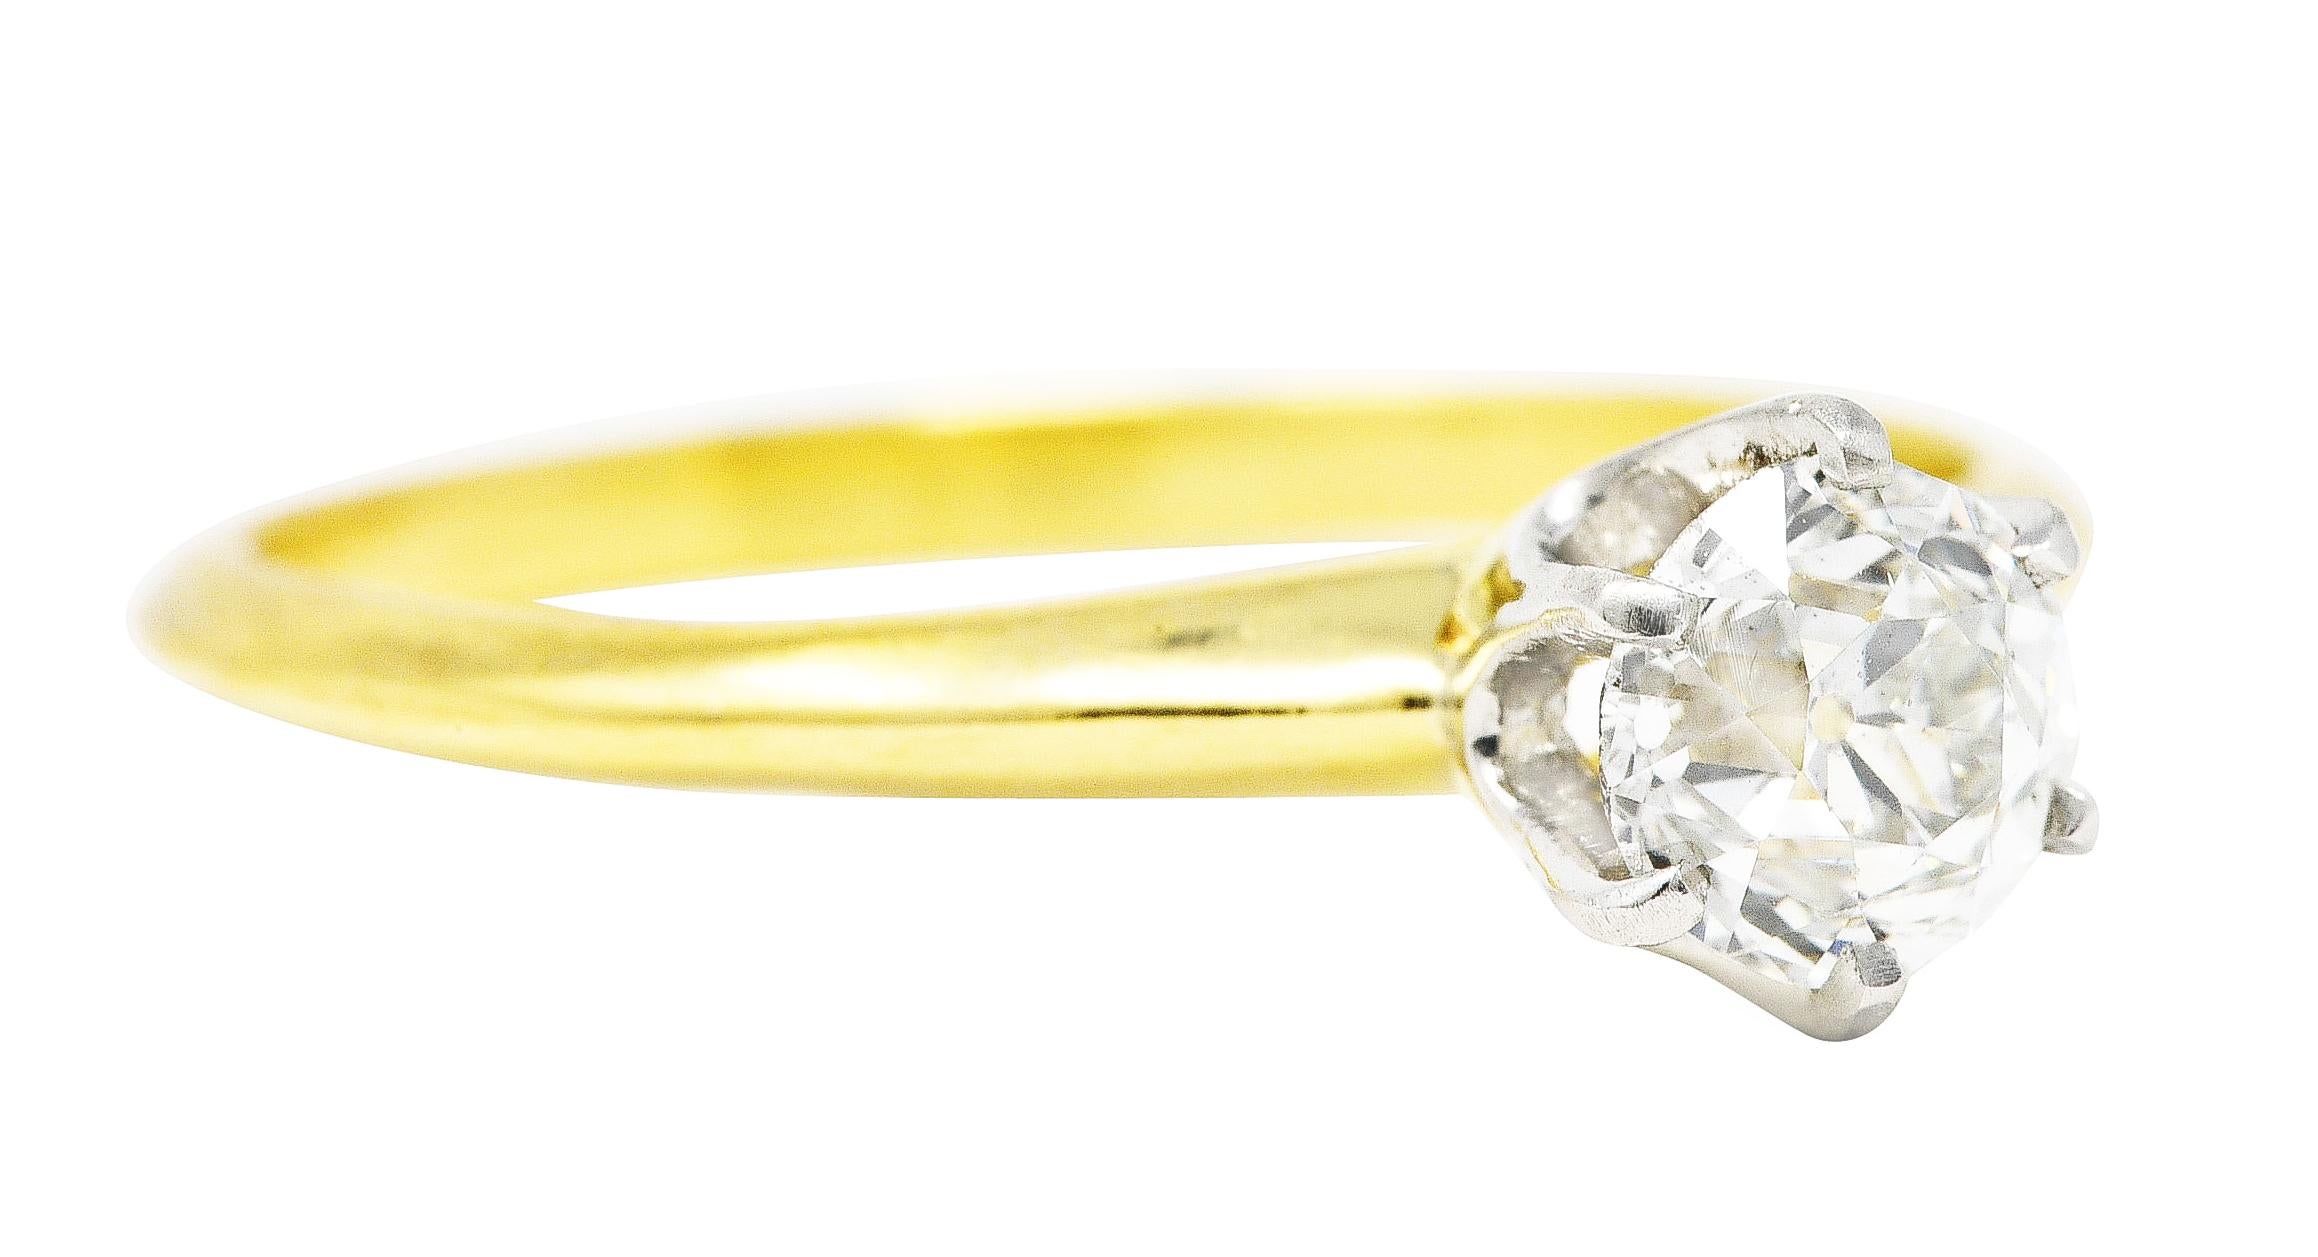 Solitaire ring features an old mine cut diamond weighing approximately 0.58 carat - H color with VS2 clarity. Set in a stylized six prong platinum head. Completed by a knife edged yellow gold shank. Stamped for platinum and 18 karat gold. Fully